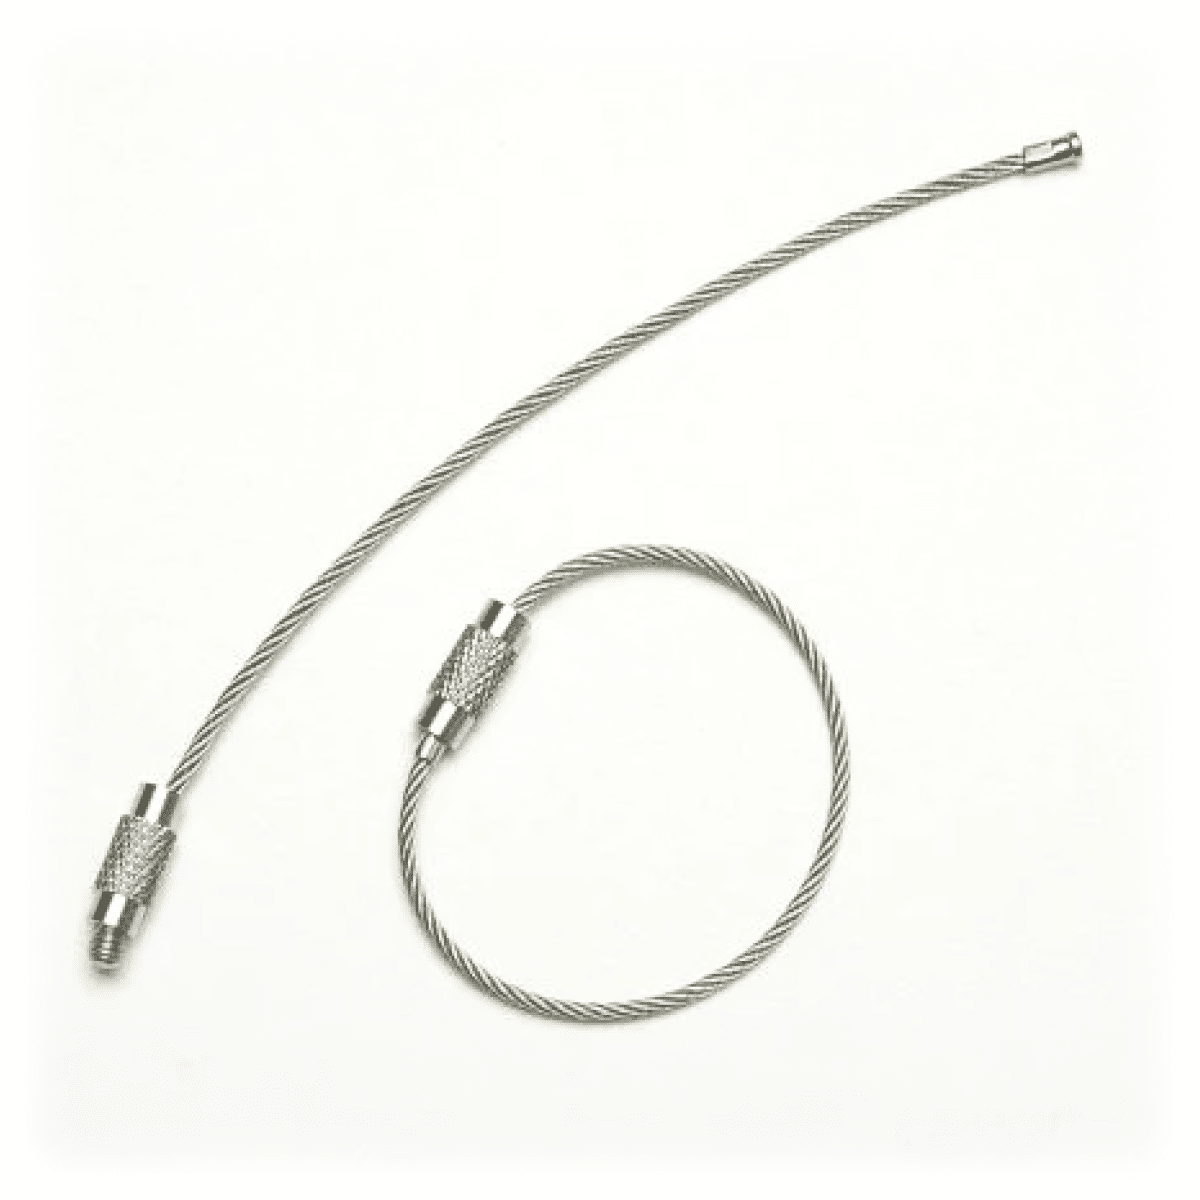 Stainless Steel Wire Fixing